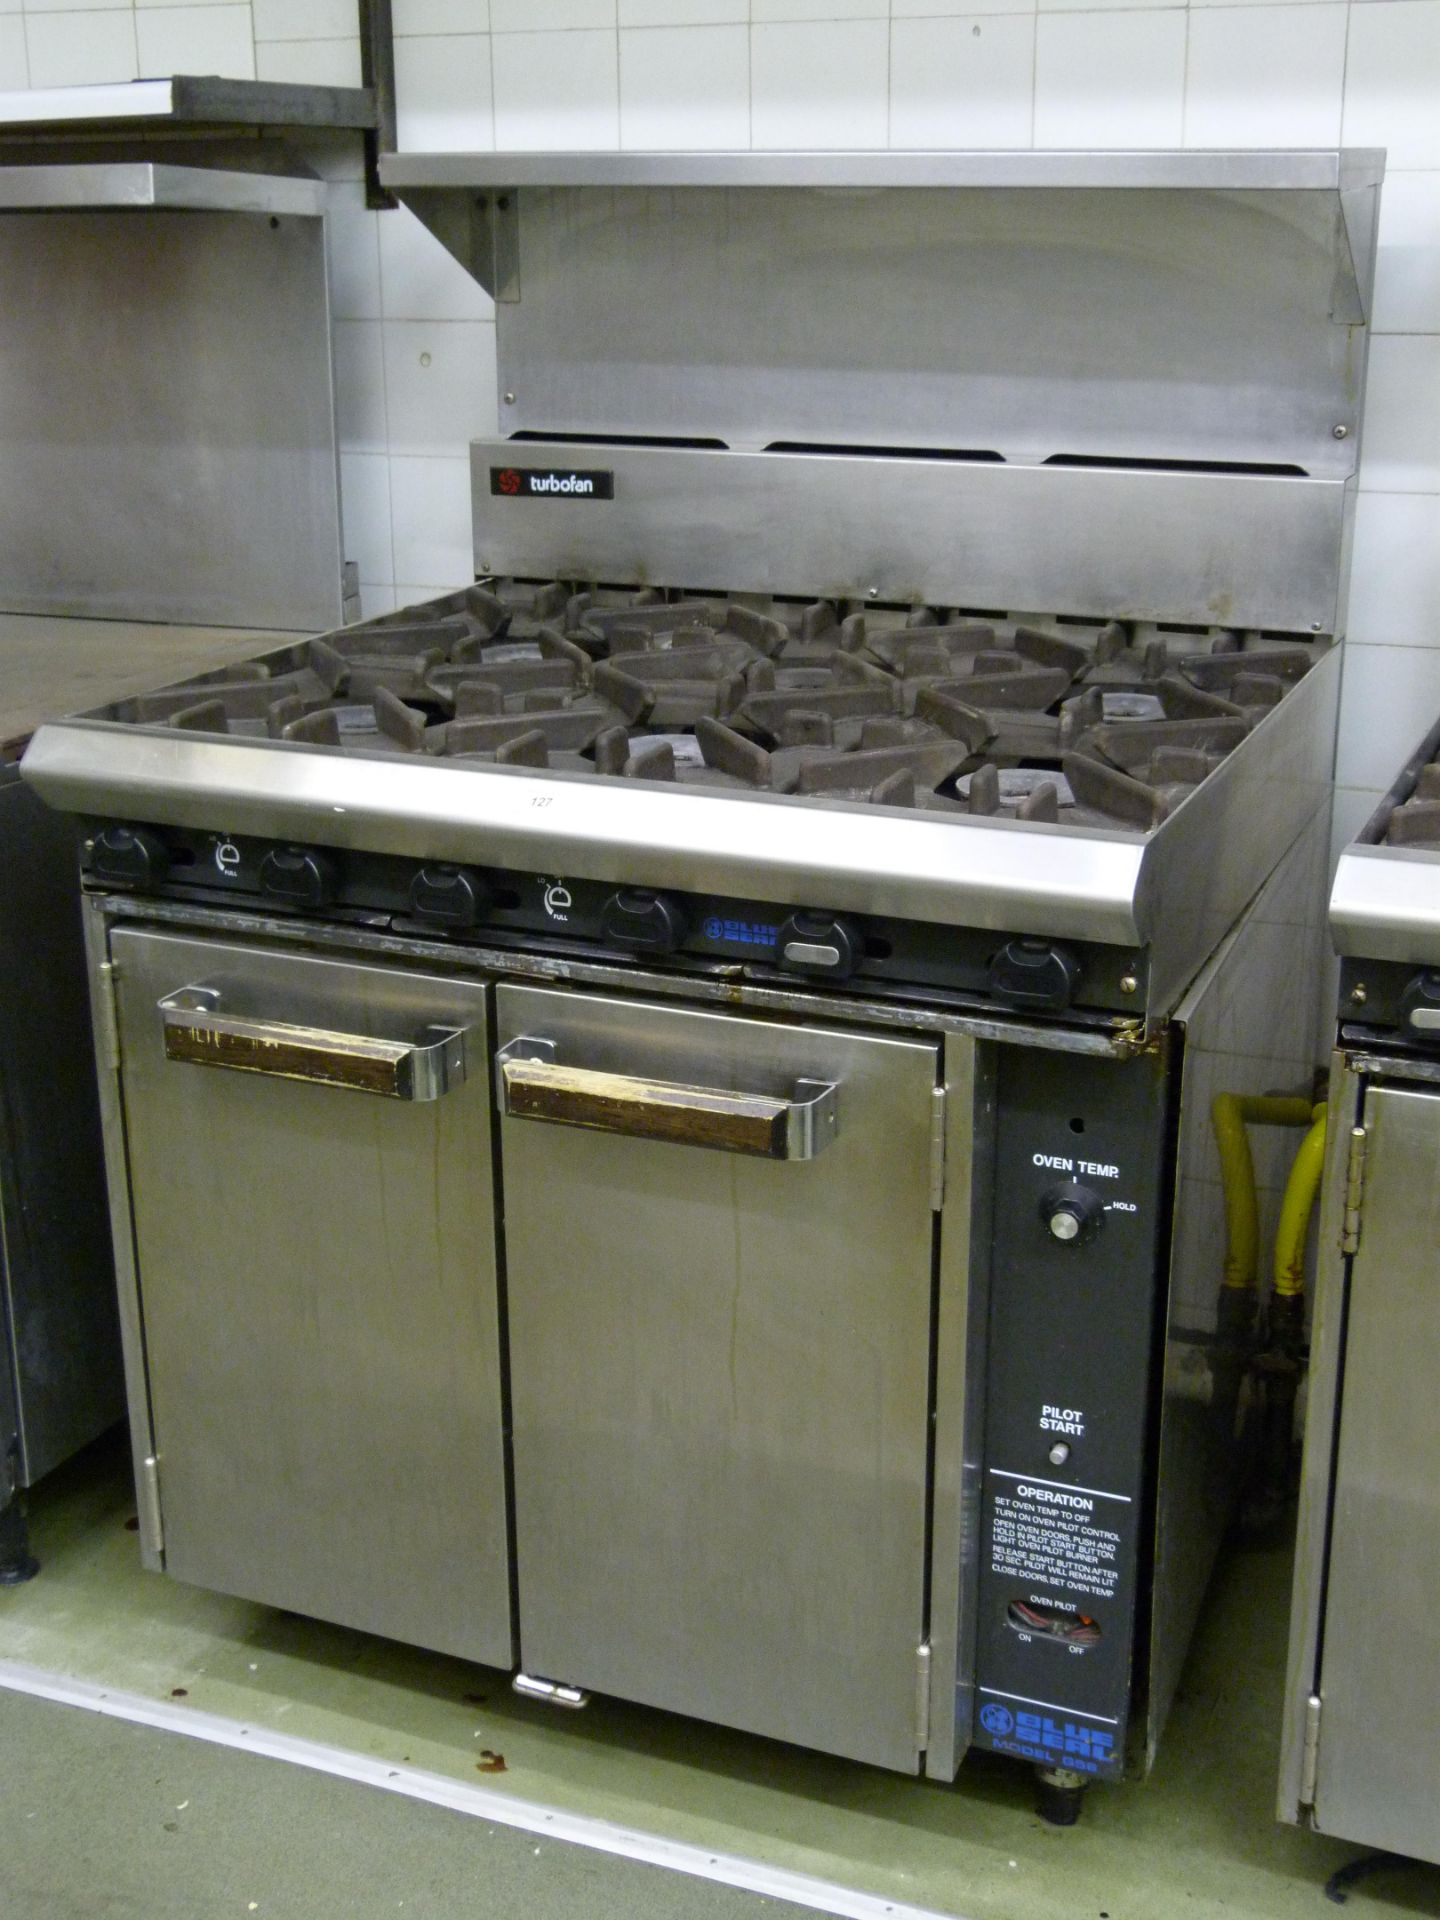 A Blue seal model 656 6 ring gas cooker with gas oven